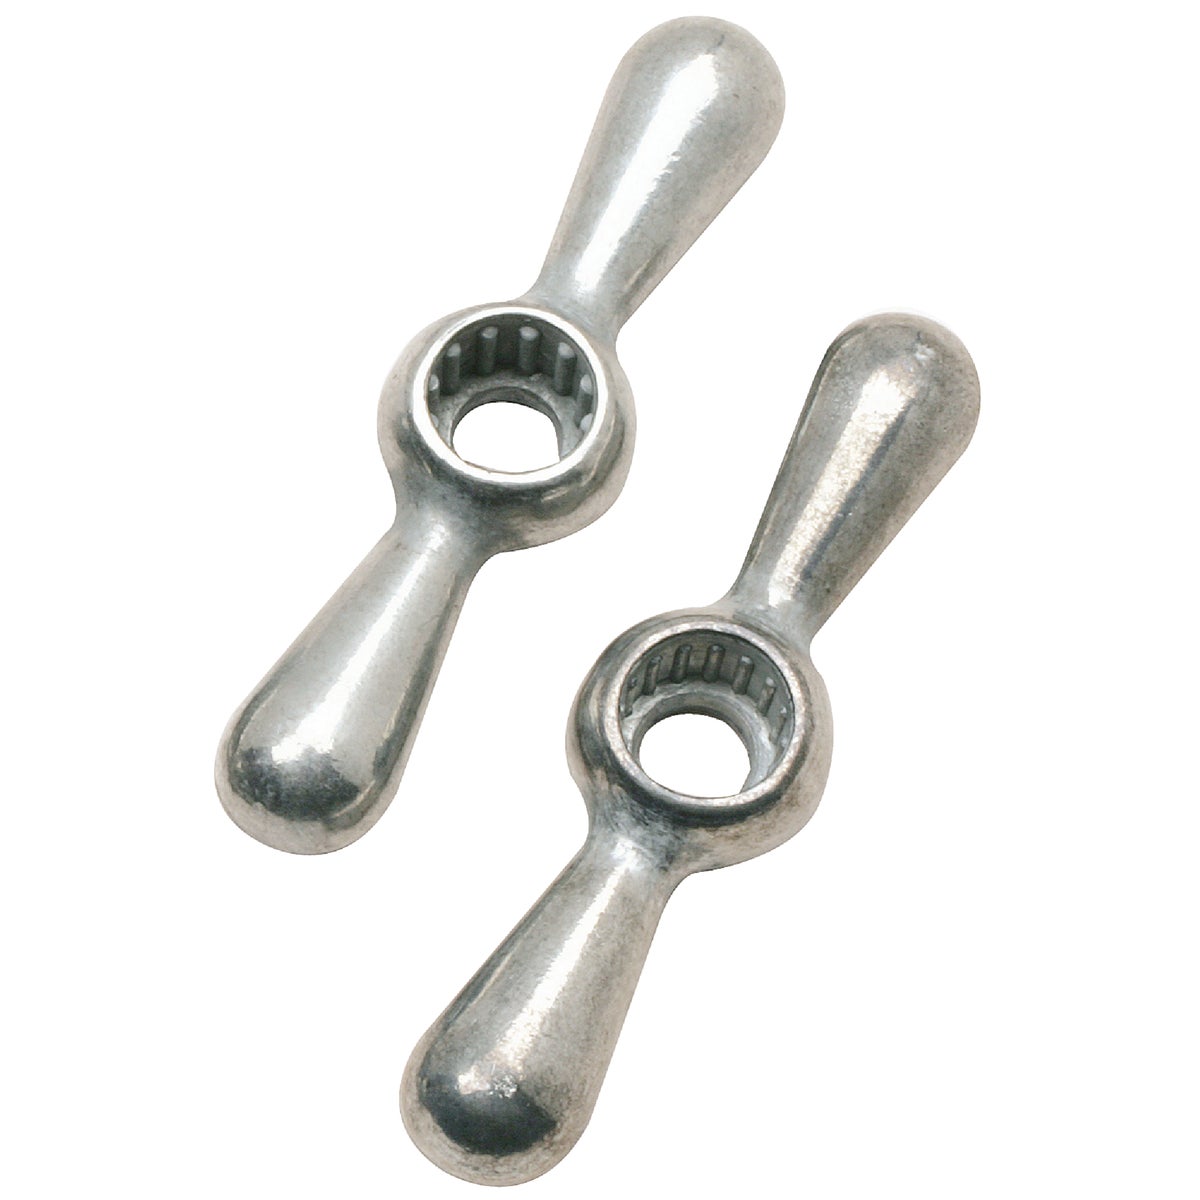 Item 489972, Tee handle for use with 16 broach, splined stem.